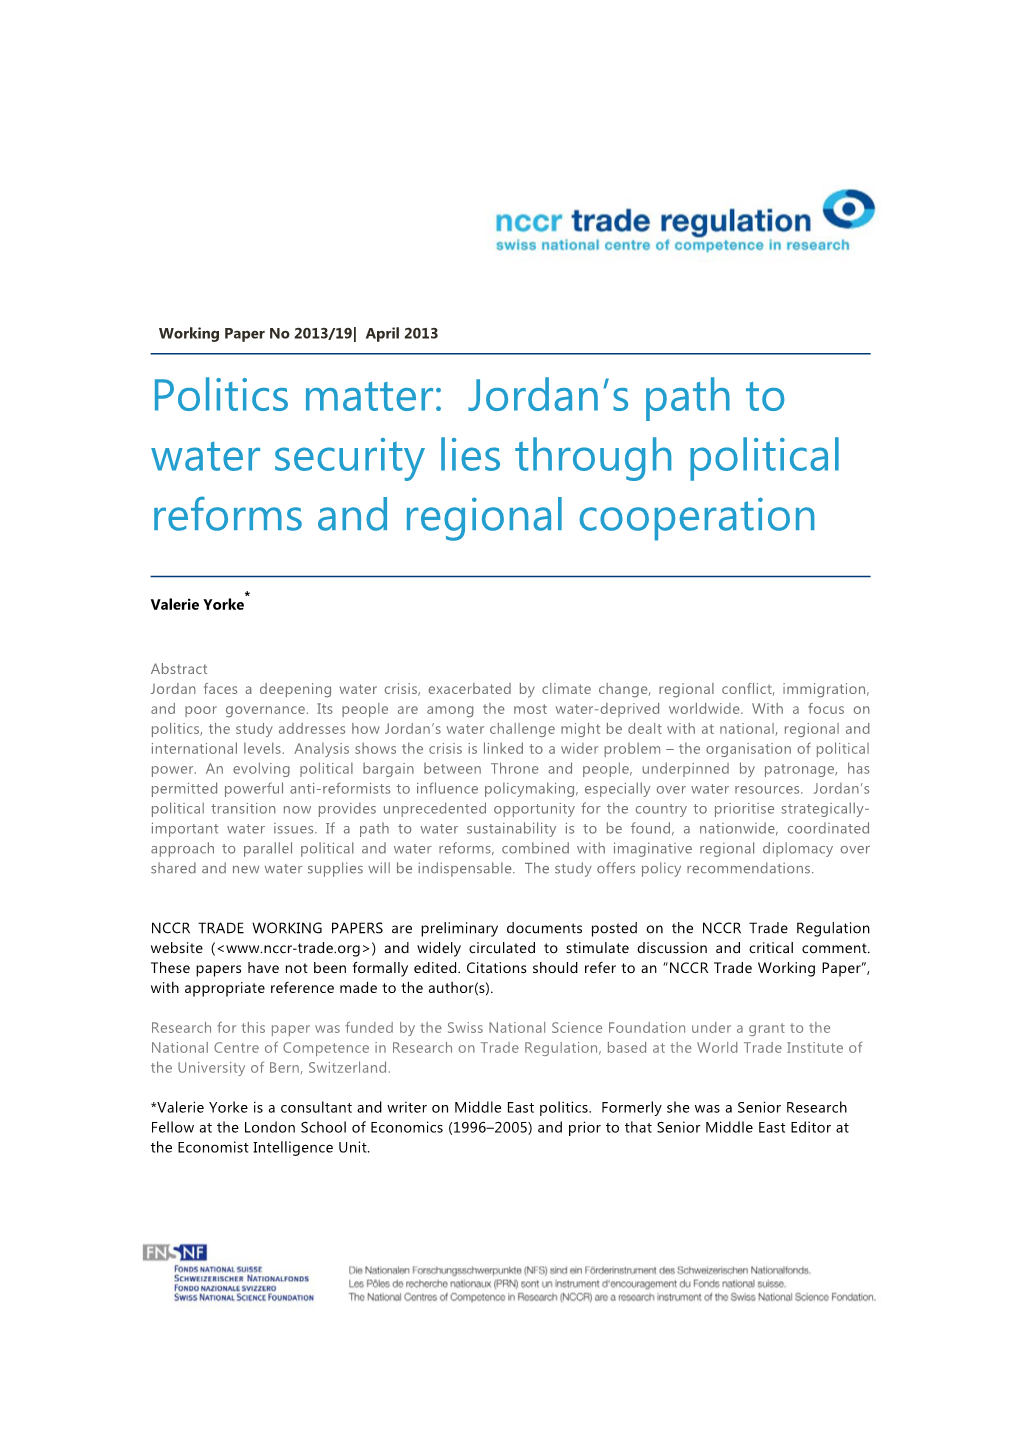 Jordan's Path to Water Security Lies Through Political Reforms And